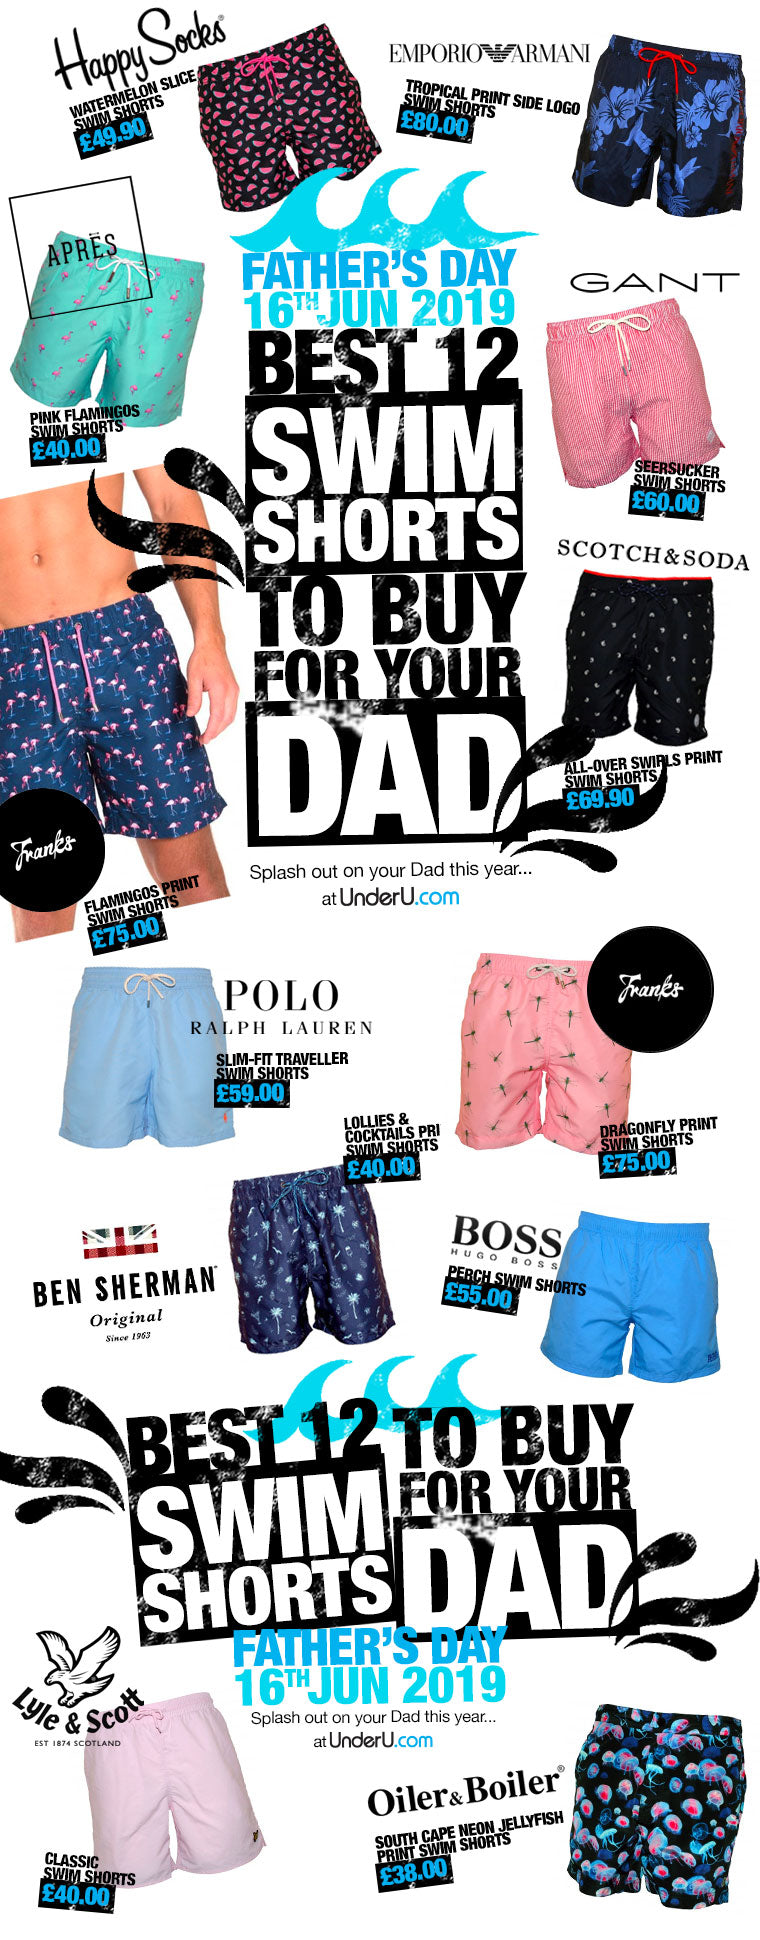 Father's Day 2019 swim shorts to buy for your Dad